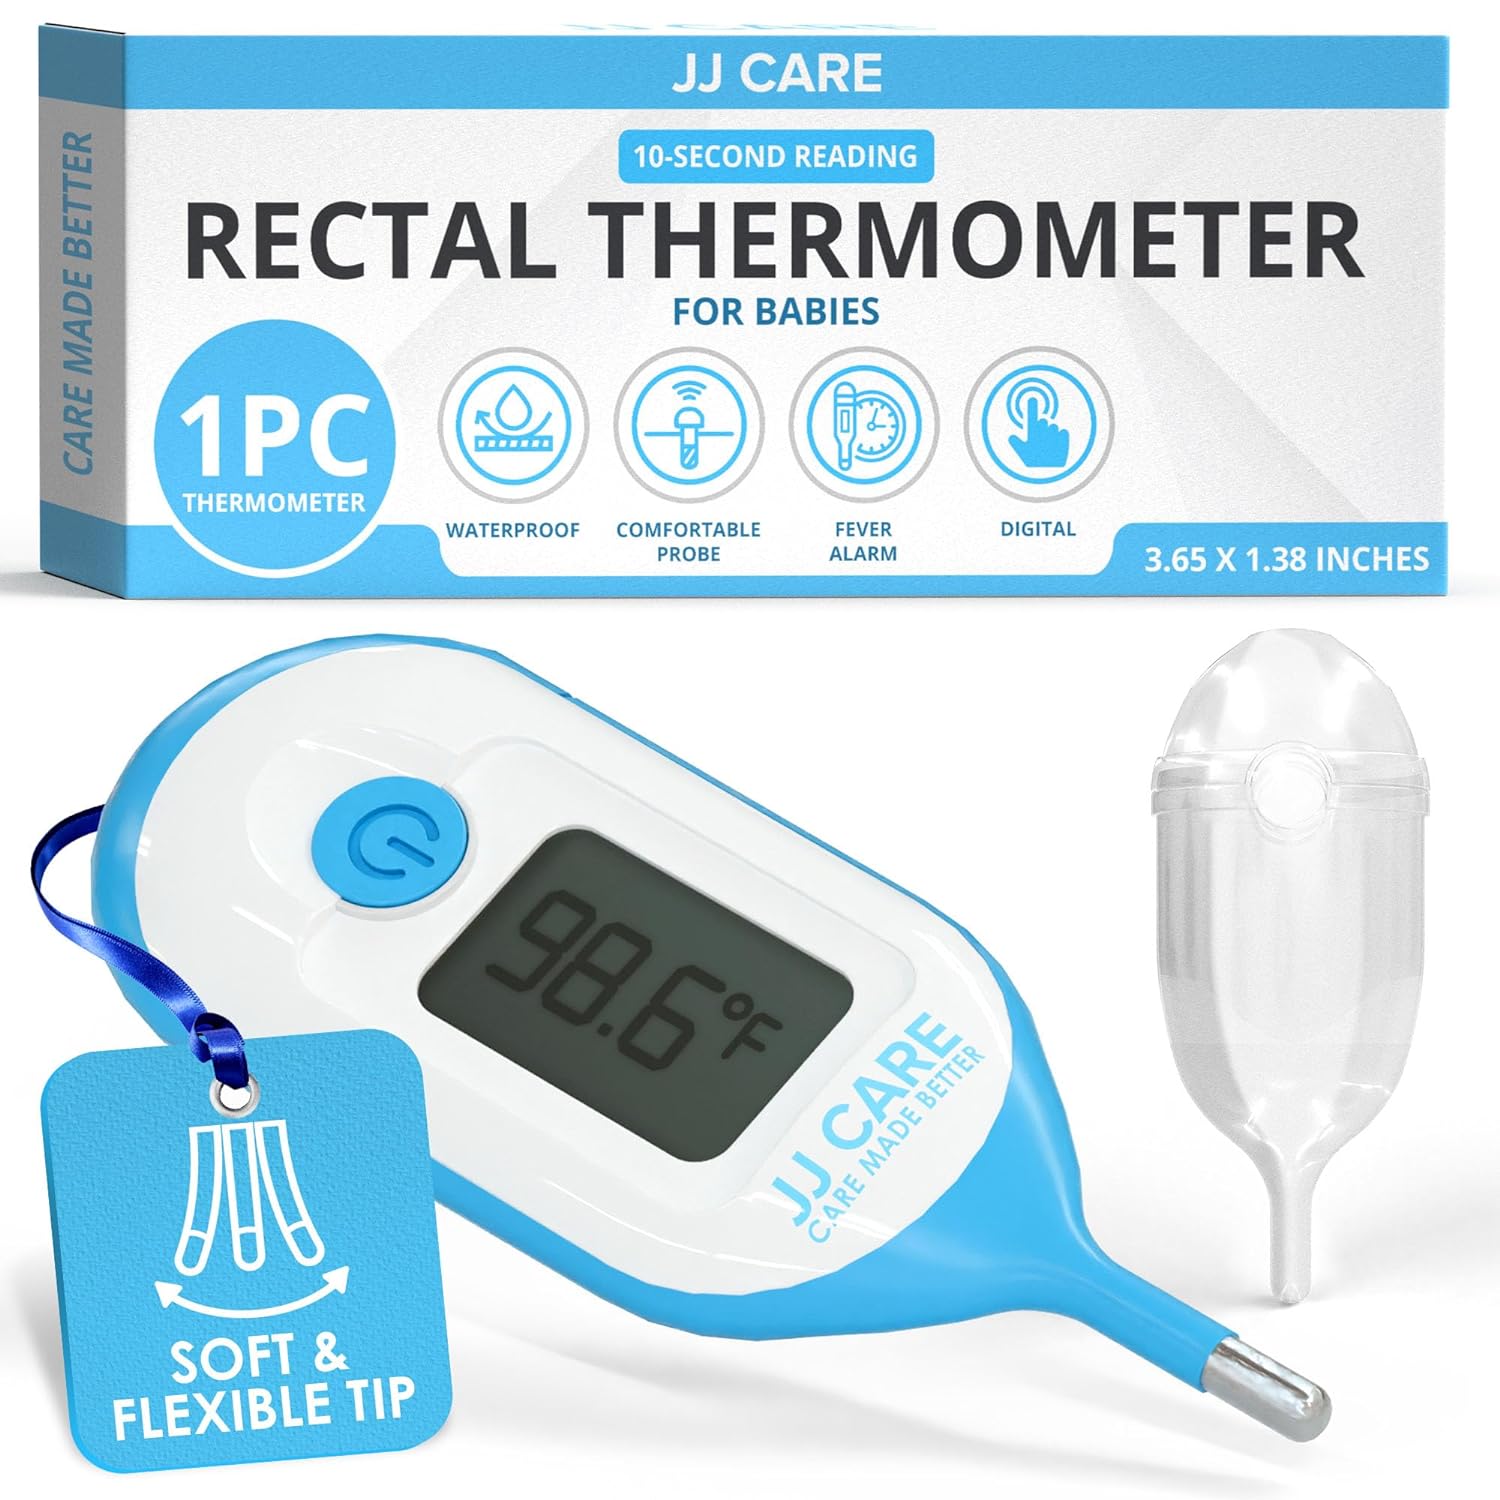 JJ CARE Rectal Thermometer for Babies with LCD Display, Calibrated Baby Rectal Thermometer, 10 Seconds Fast Reading Infant Rectal Thermometer for Fever with Storage Case